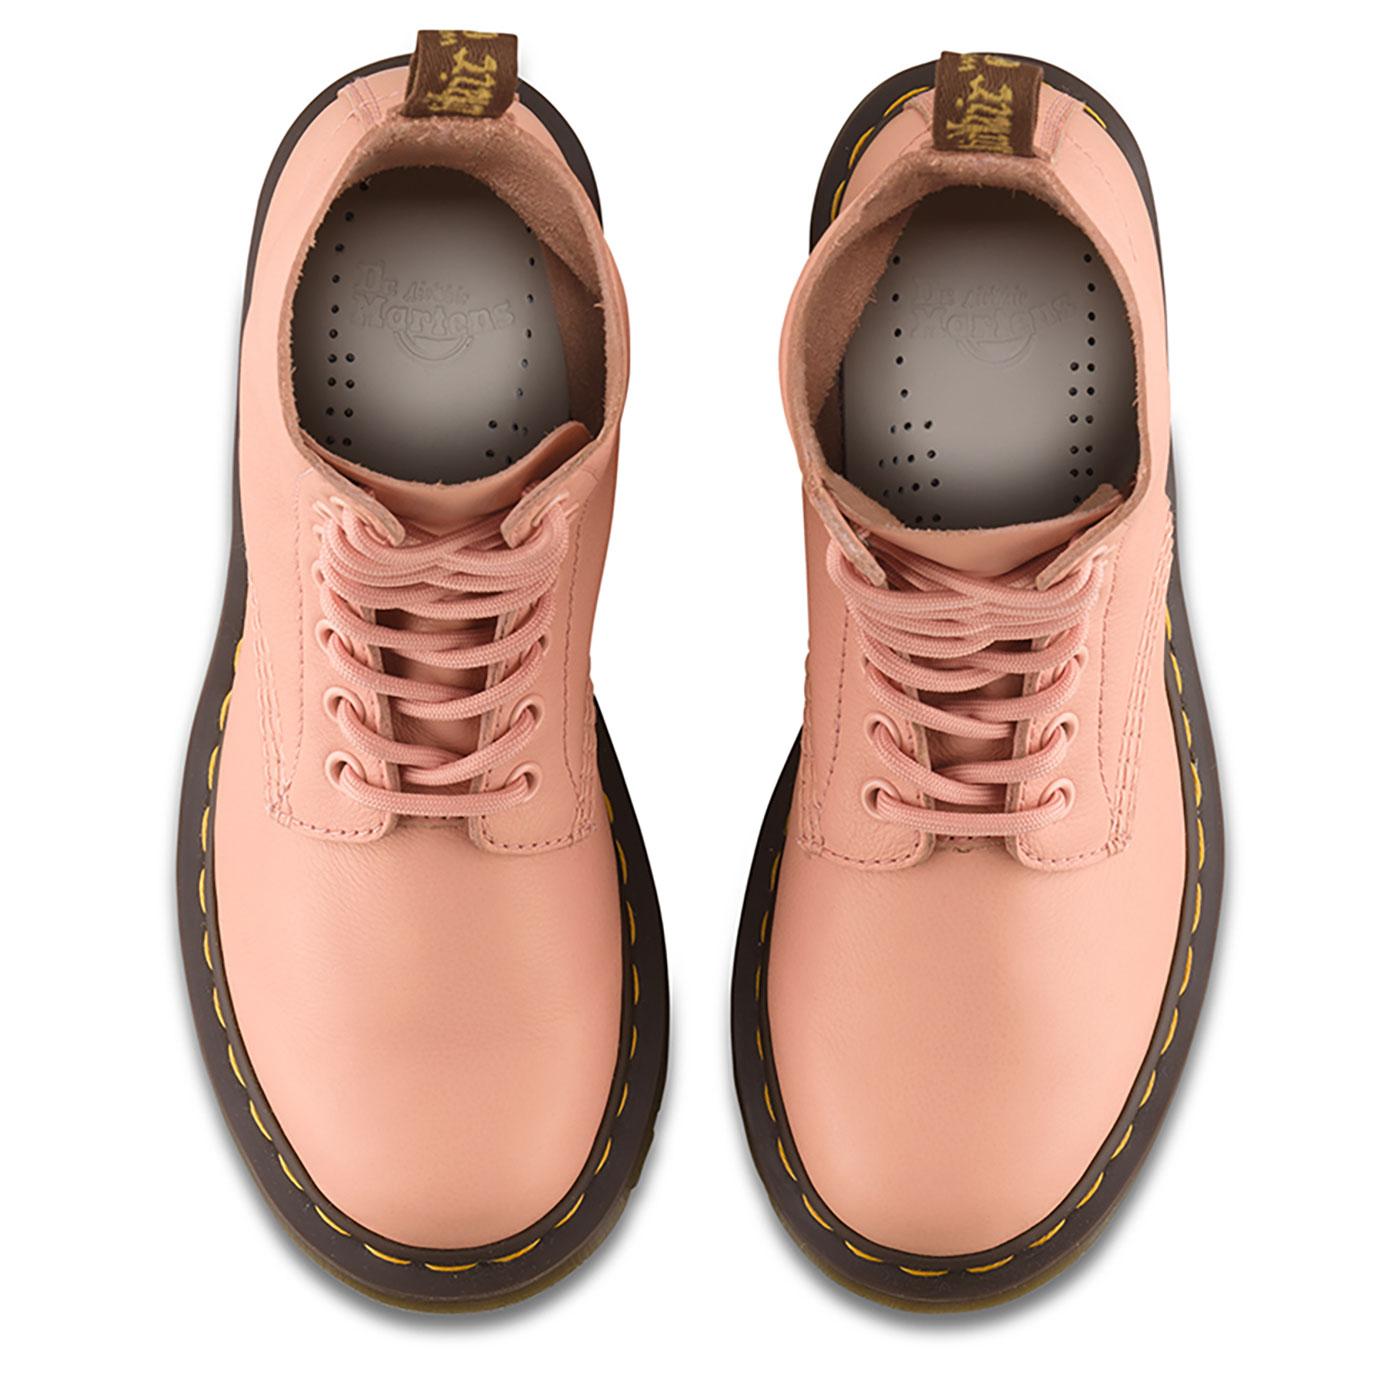 DR MARTENS Women's 1460 Pascal Virginia Boots in Salmon